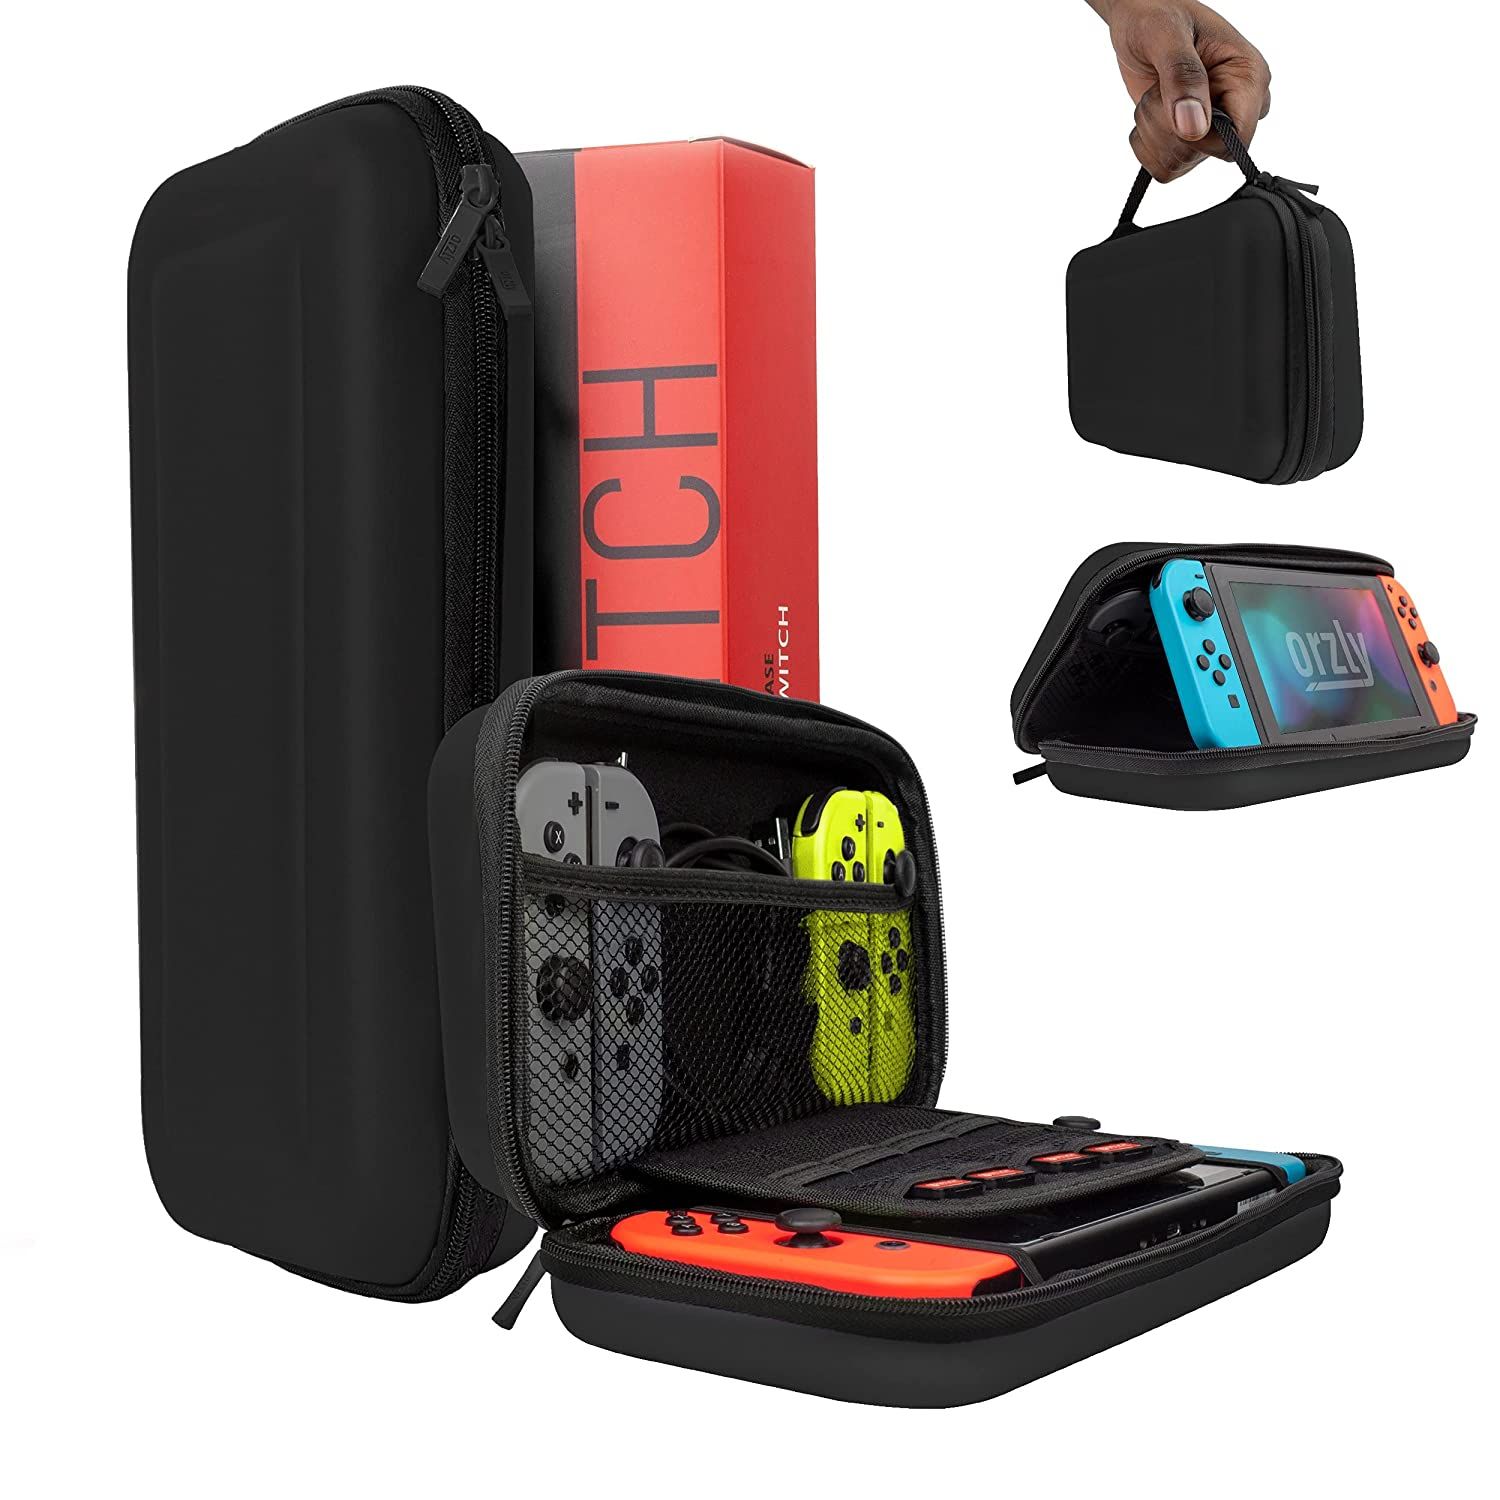 Orzly Carry Case and accessories